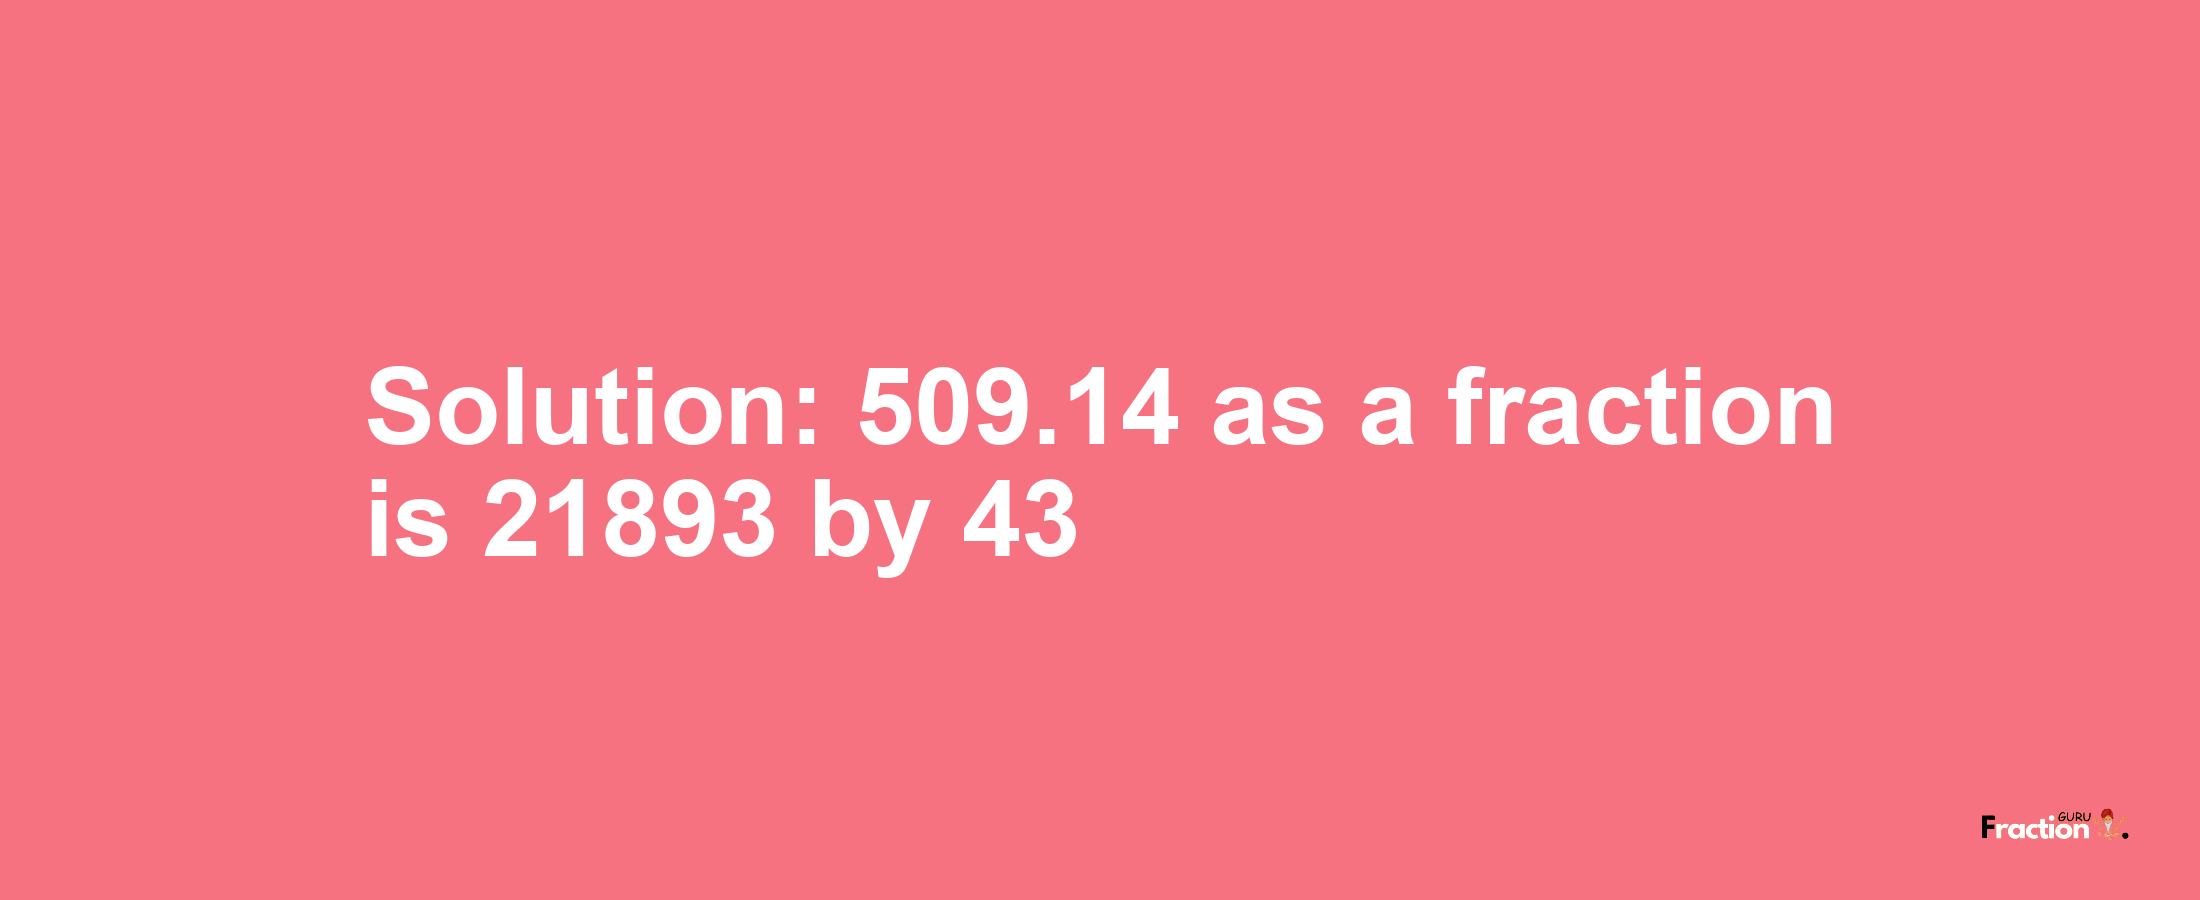 Solution:509.14 as a fraction is 21893/43